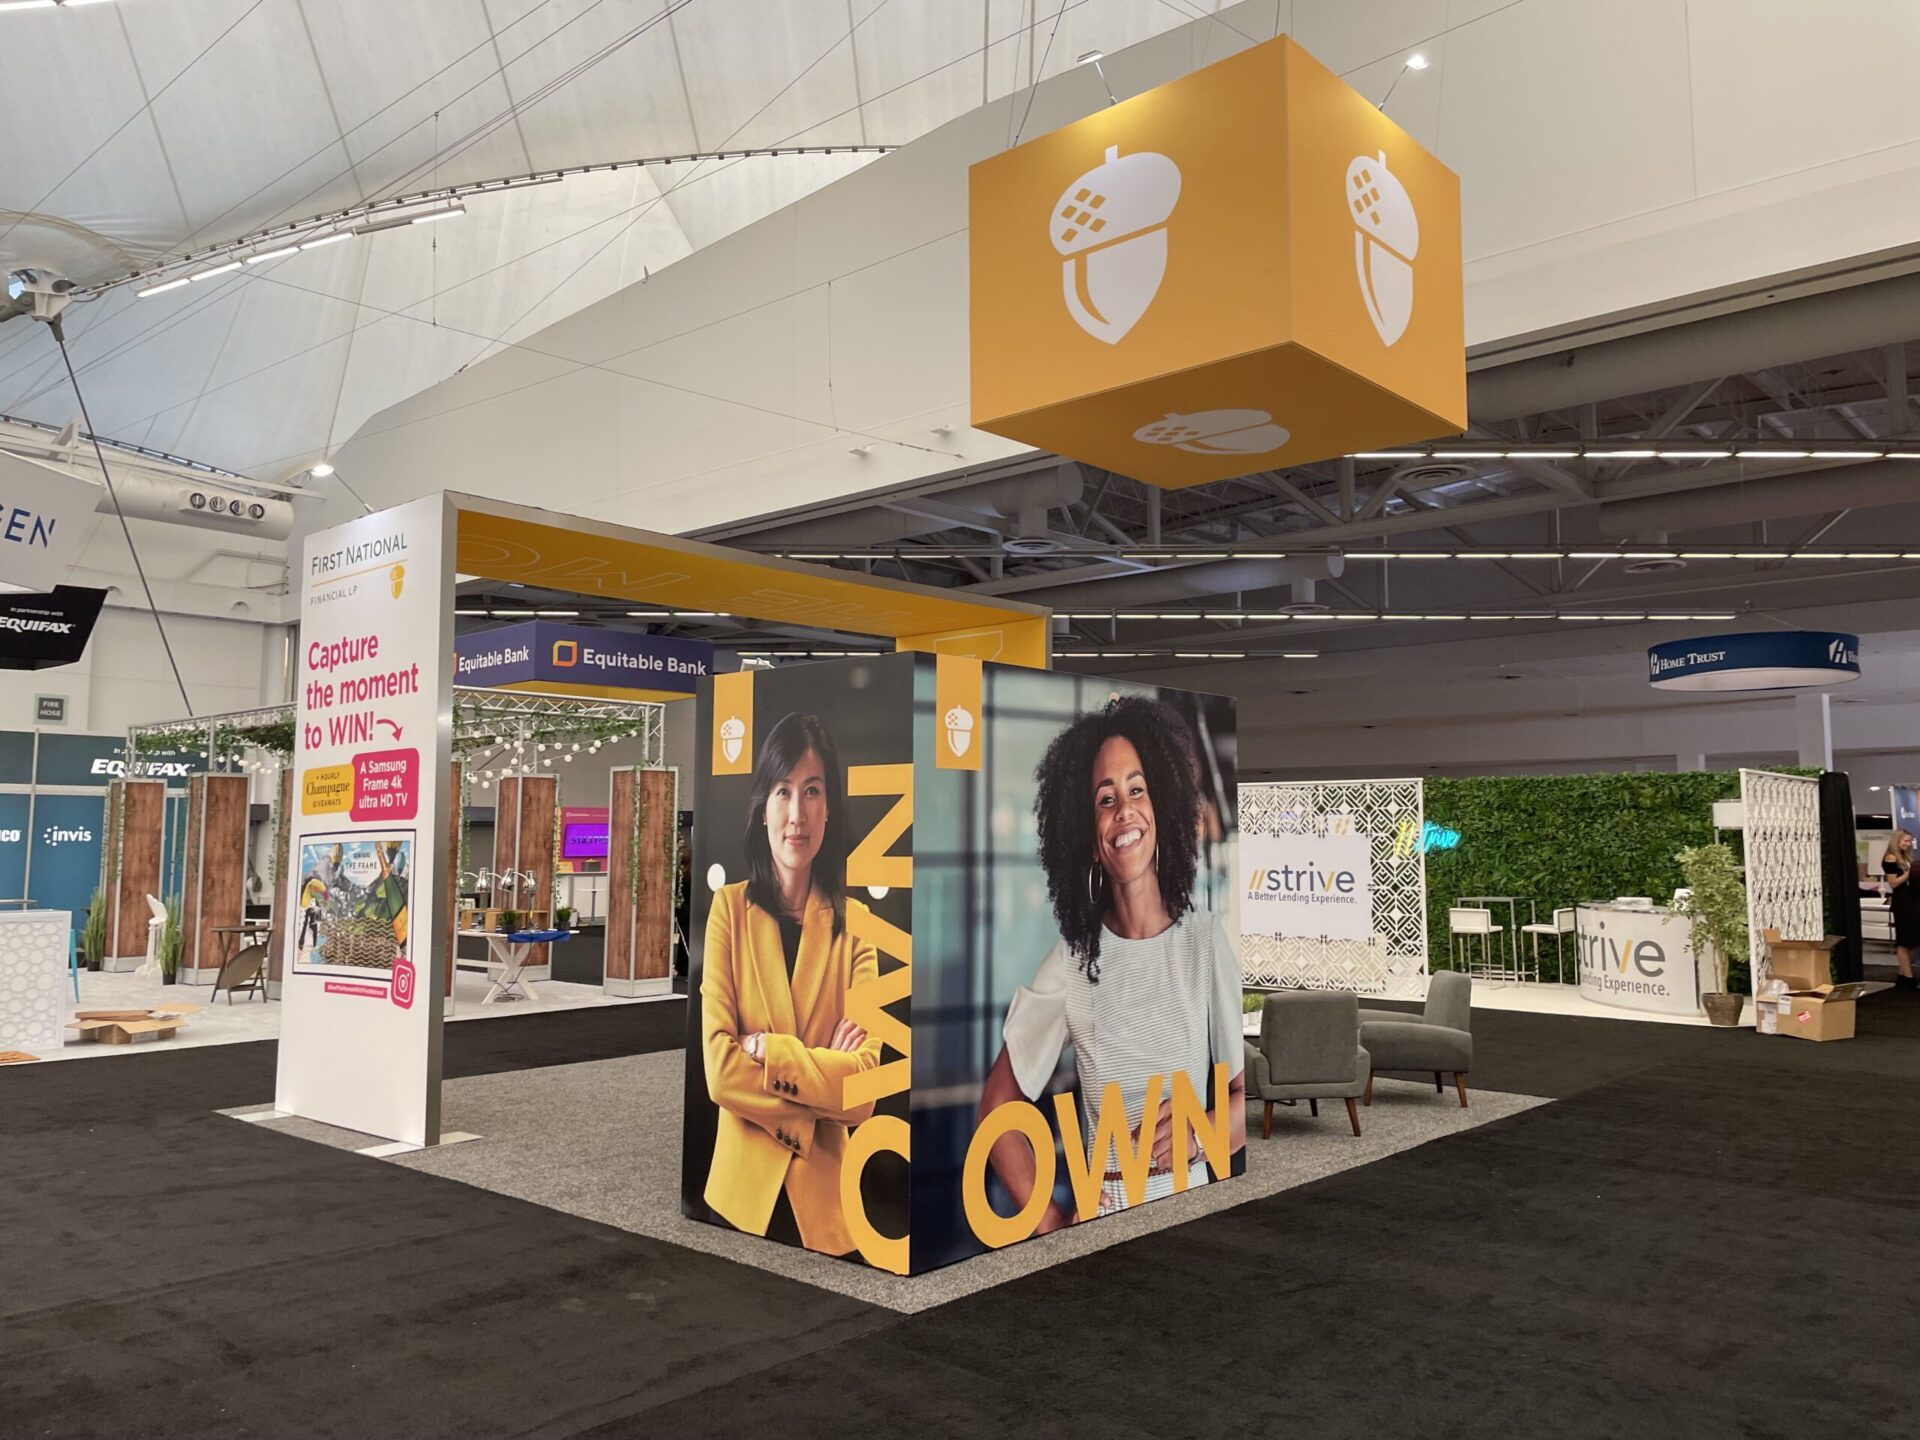 First National bank trade show booth with large photos of customers